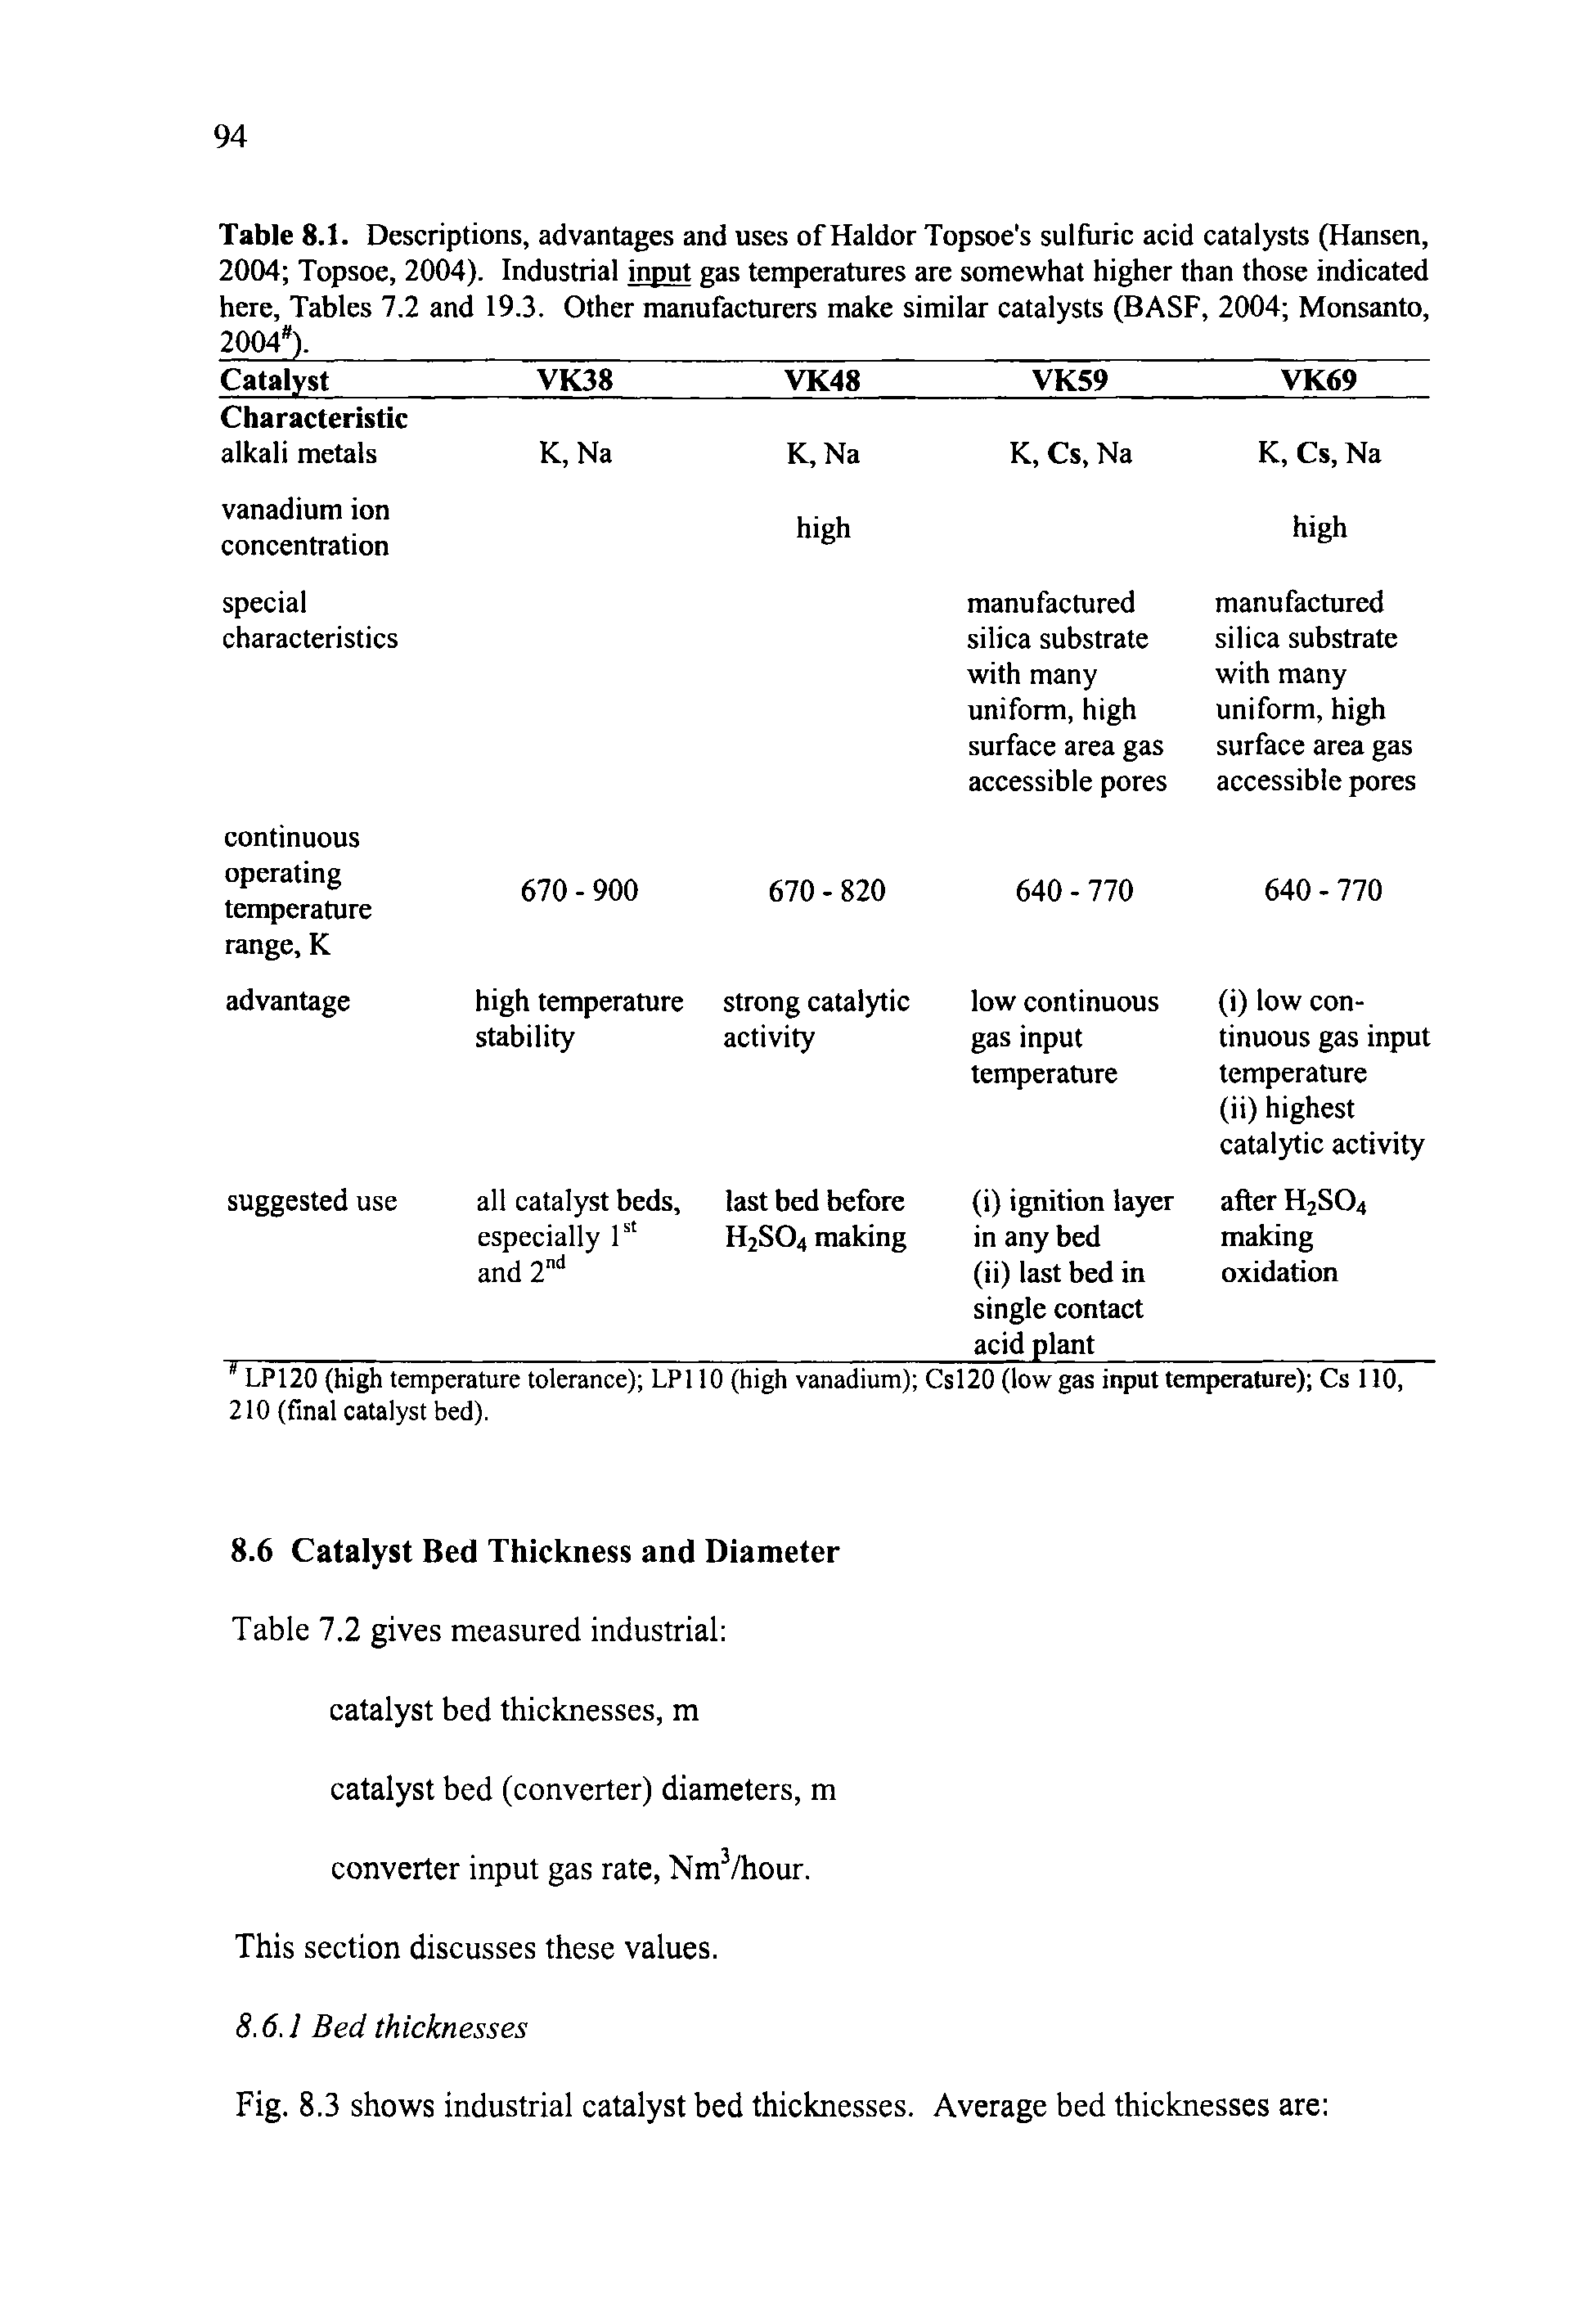 Table 8.1. Descriptions, advantages and uses of Haldor Topsoe s sulfuric acid catalysts (Hansen, 2004 Topsoe, 2004). Industrial input gas temperatures are somewhat higher than those indicated here, Tables 7.2 and 19.3. Other manufacturers make similar catalysts (BASF, 2004 Monsanto, 2004s). ...